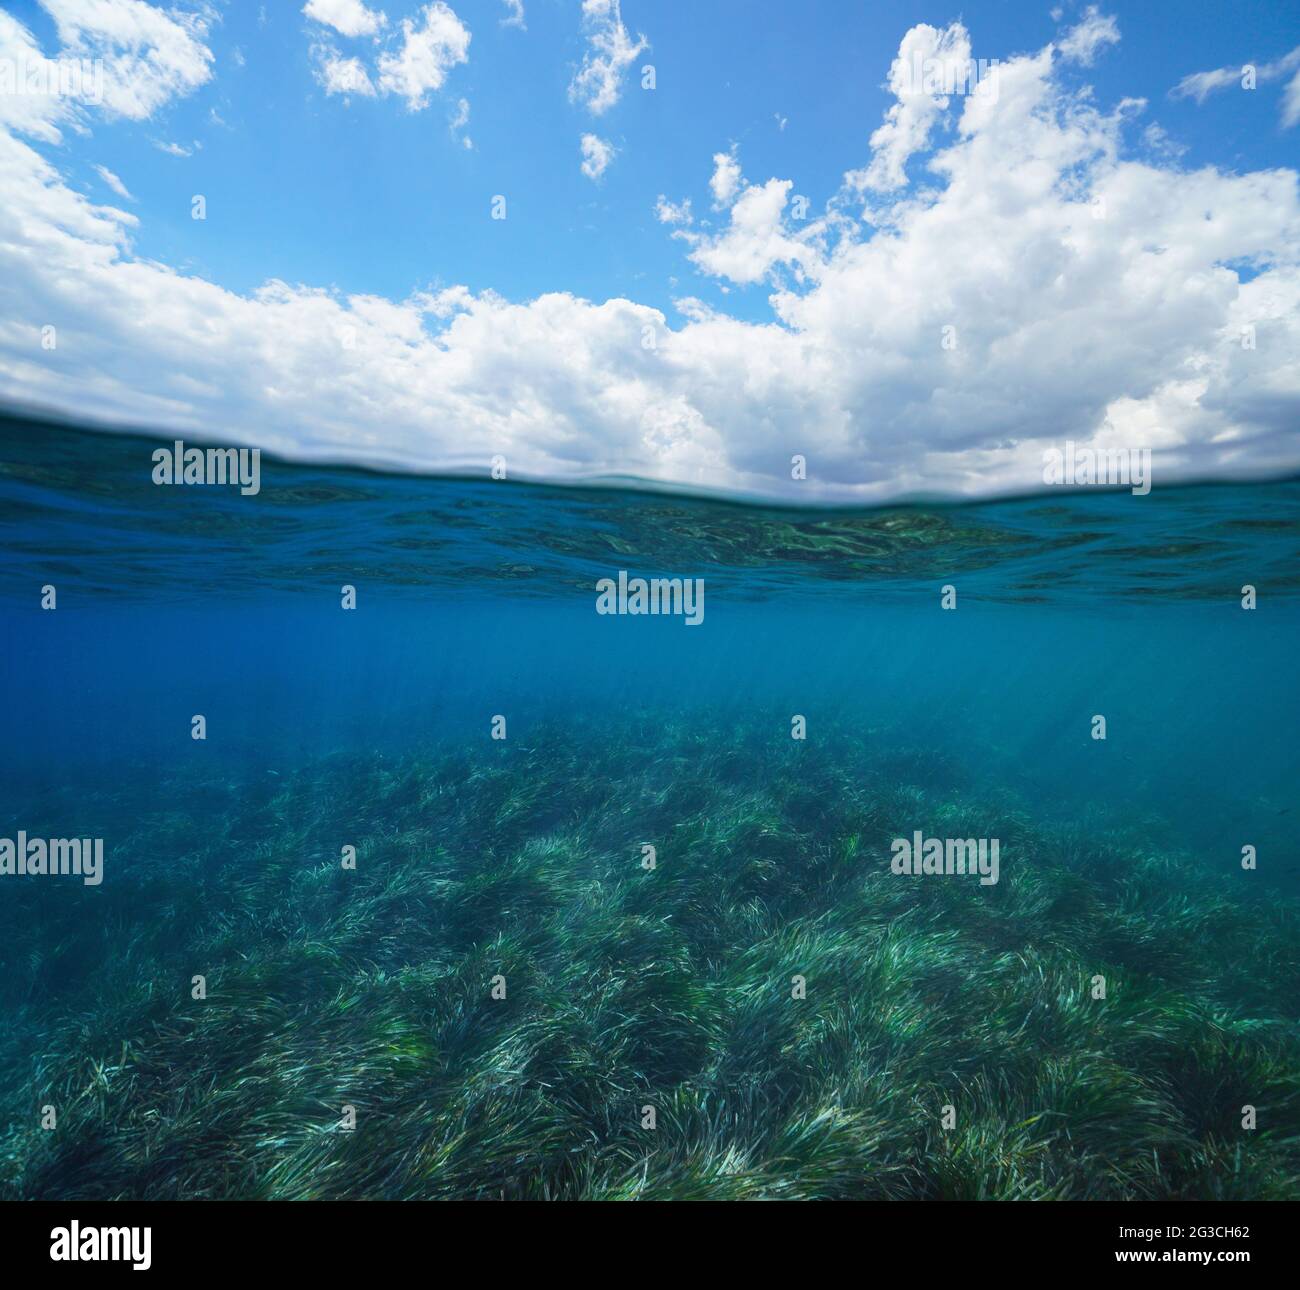 Seascape with sea grass underwater and blue sky with cloud, split view over and under water surface, Mediterranean sea Stock Photo